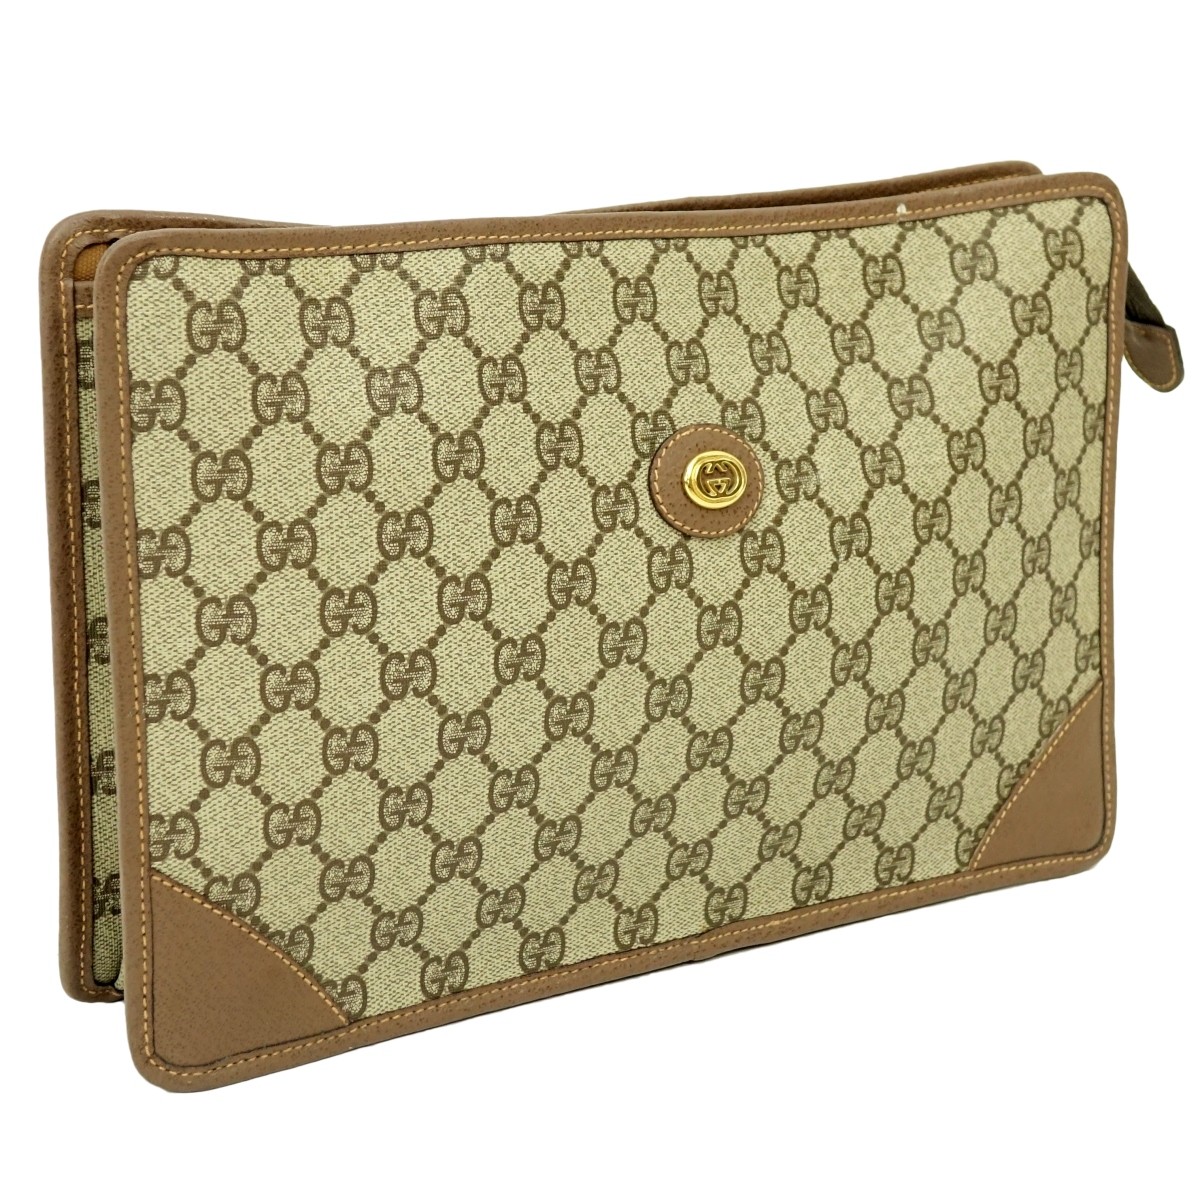 Gucci Beige Coated Canvas Vintage Clutch